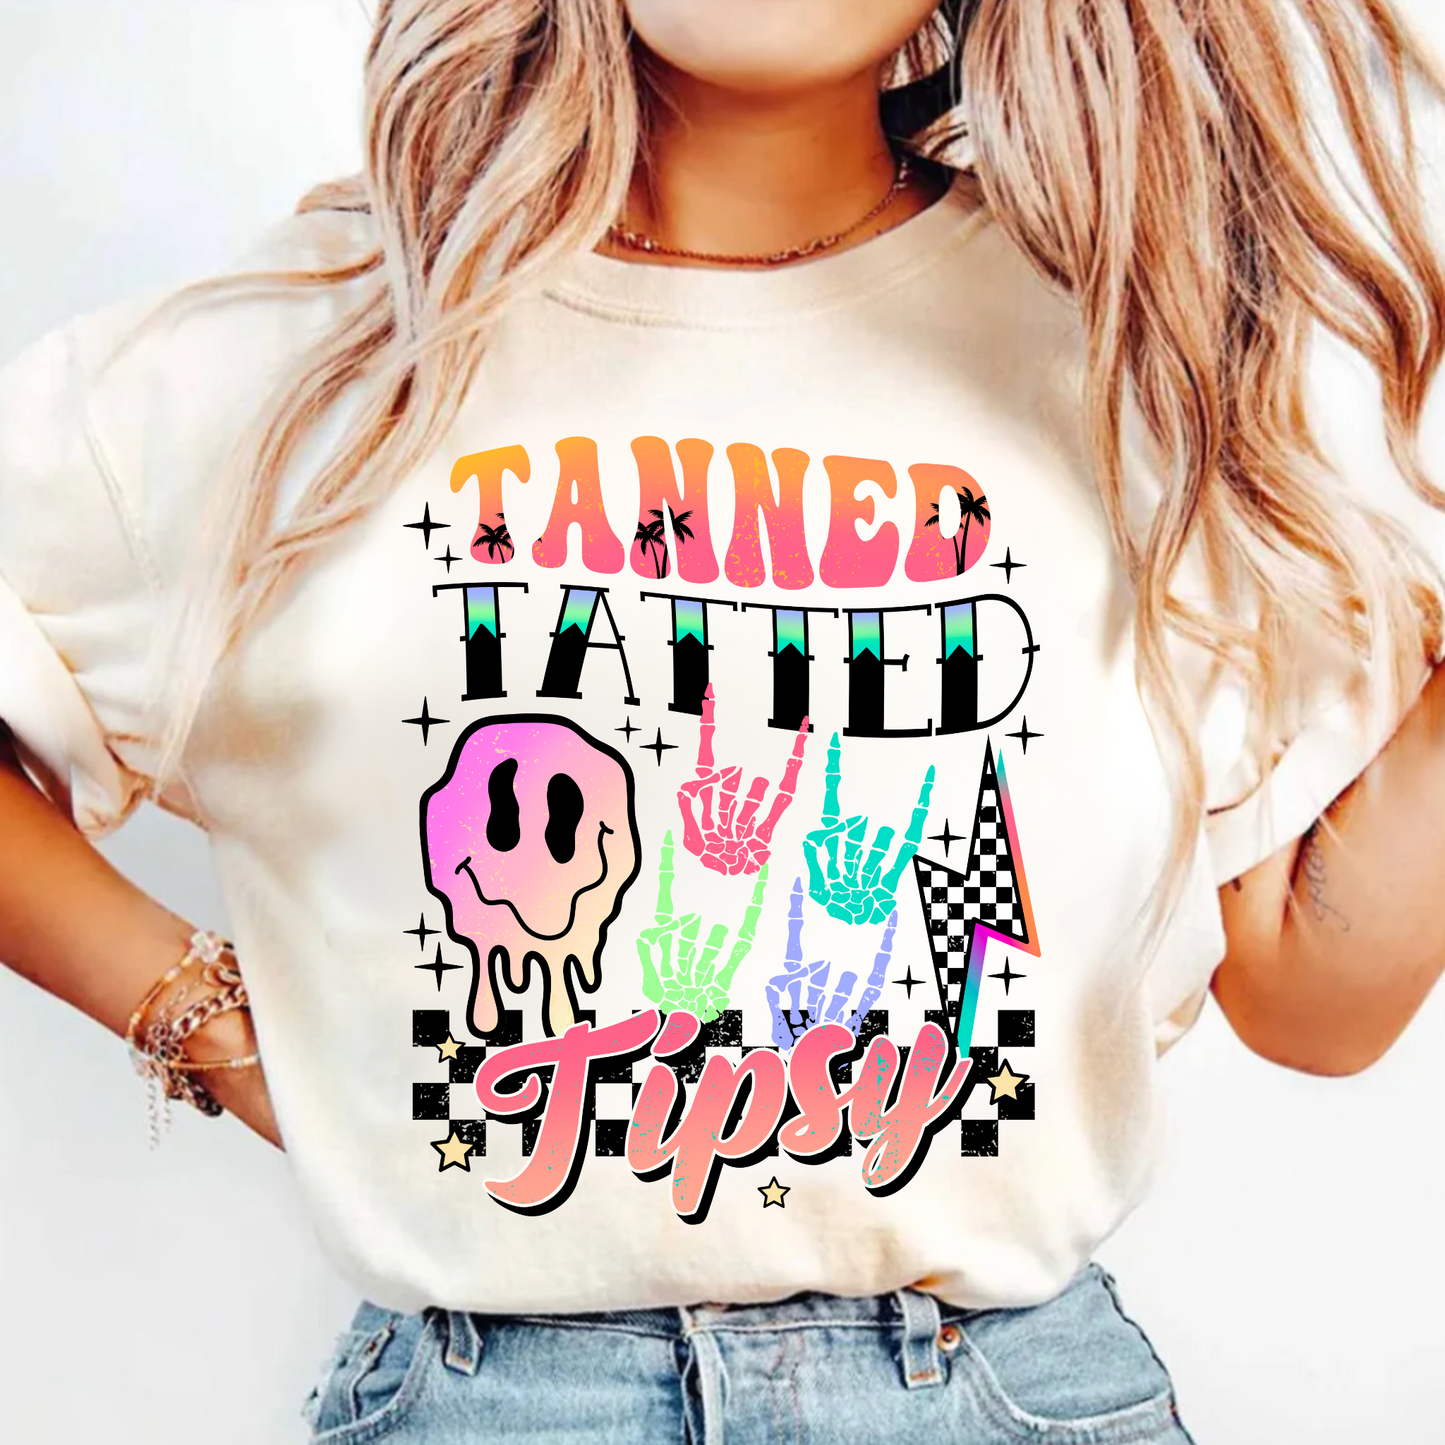 Tanned, Tatted, Tipsy T-Shirt